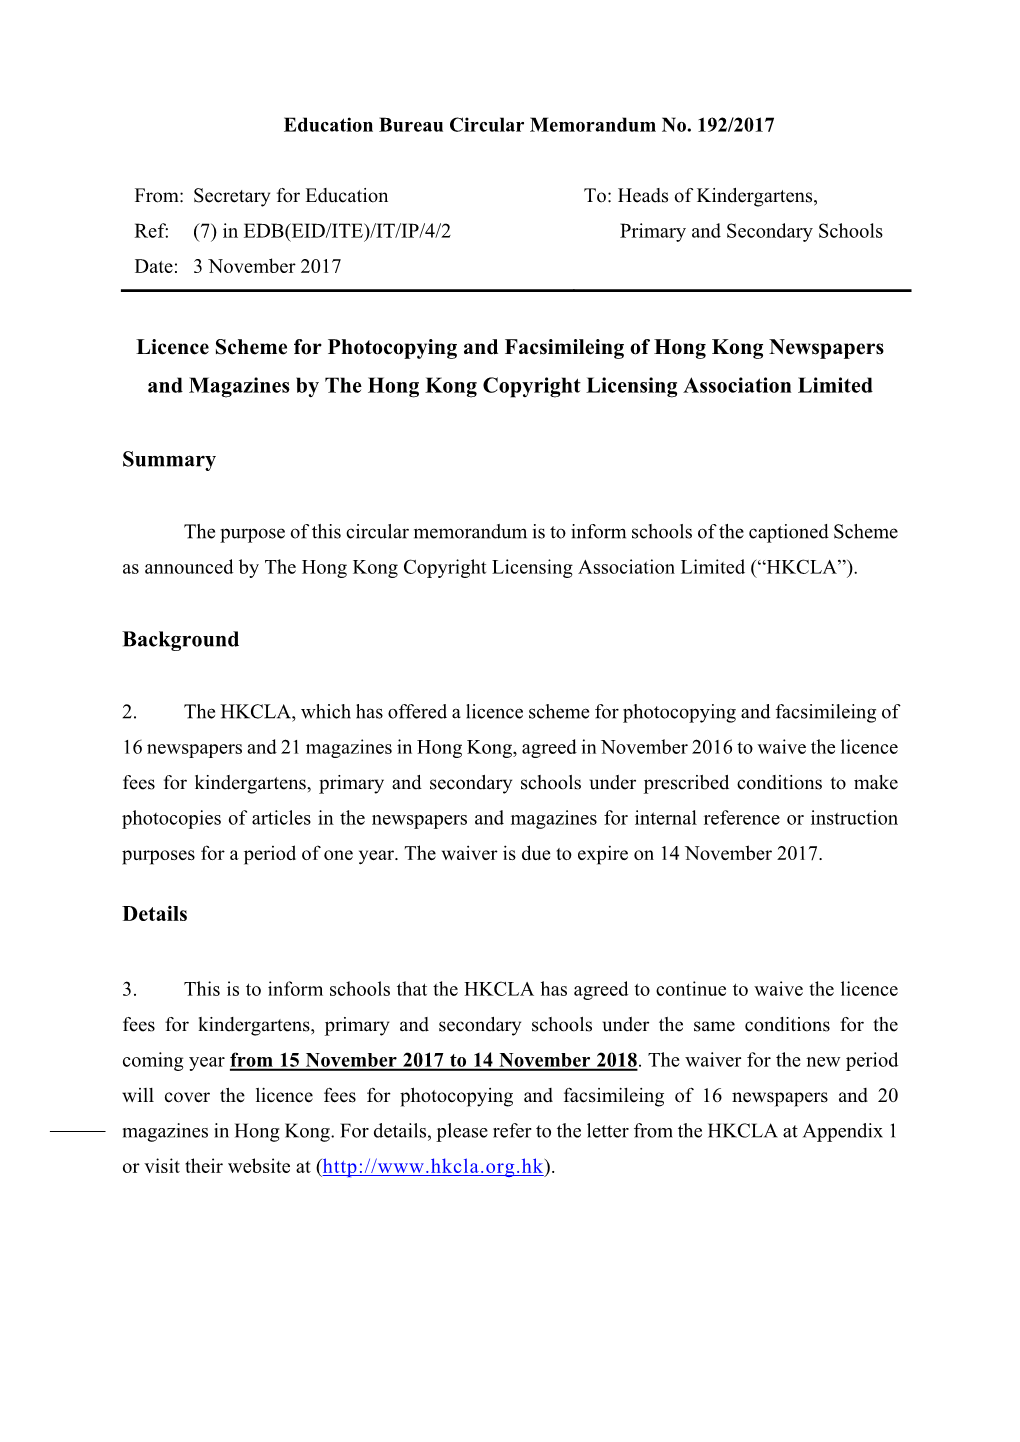 Licence Scheme for Photocopying and Facsimileing of Hong Kong Newspapers and Magazines by the Hong Kong Copyright Licensing Association Limited